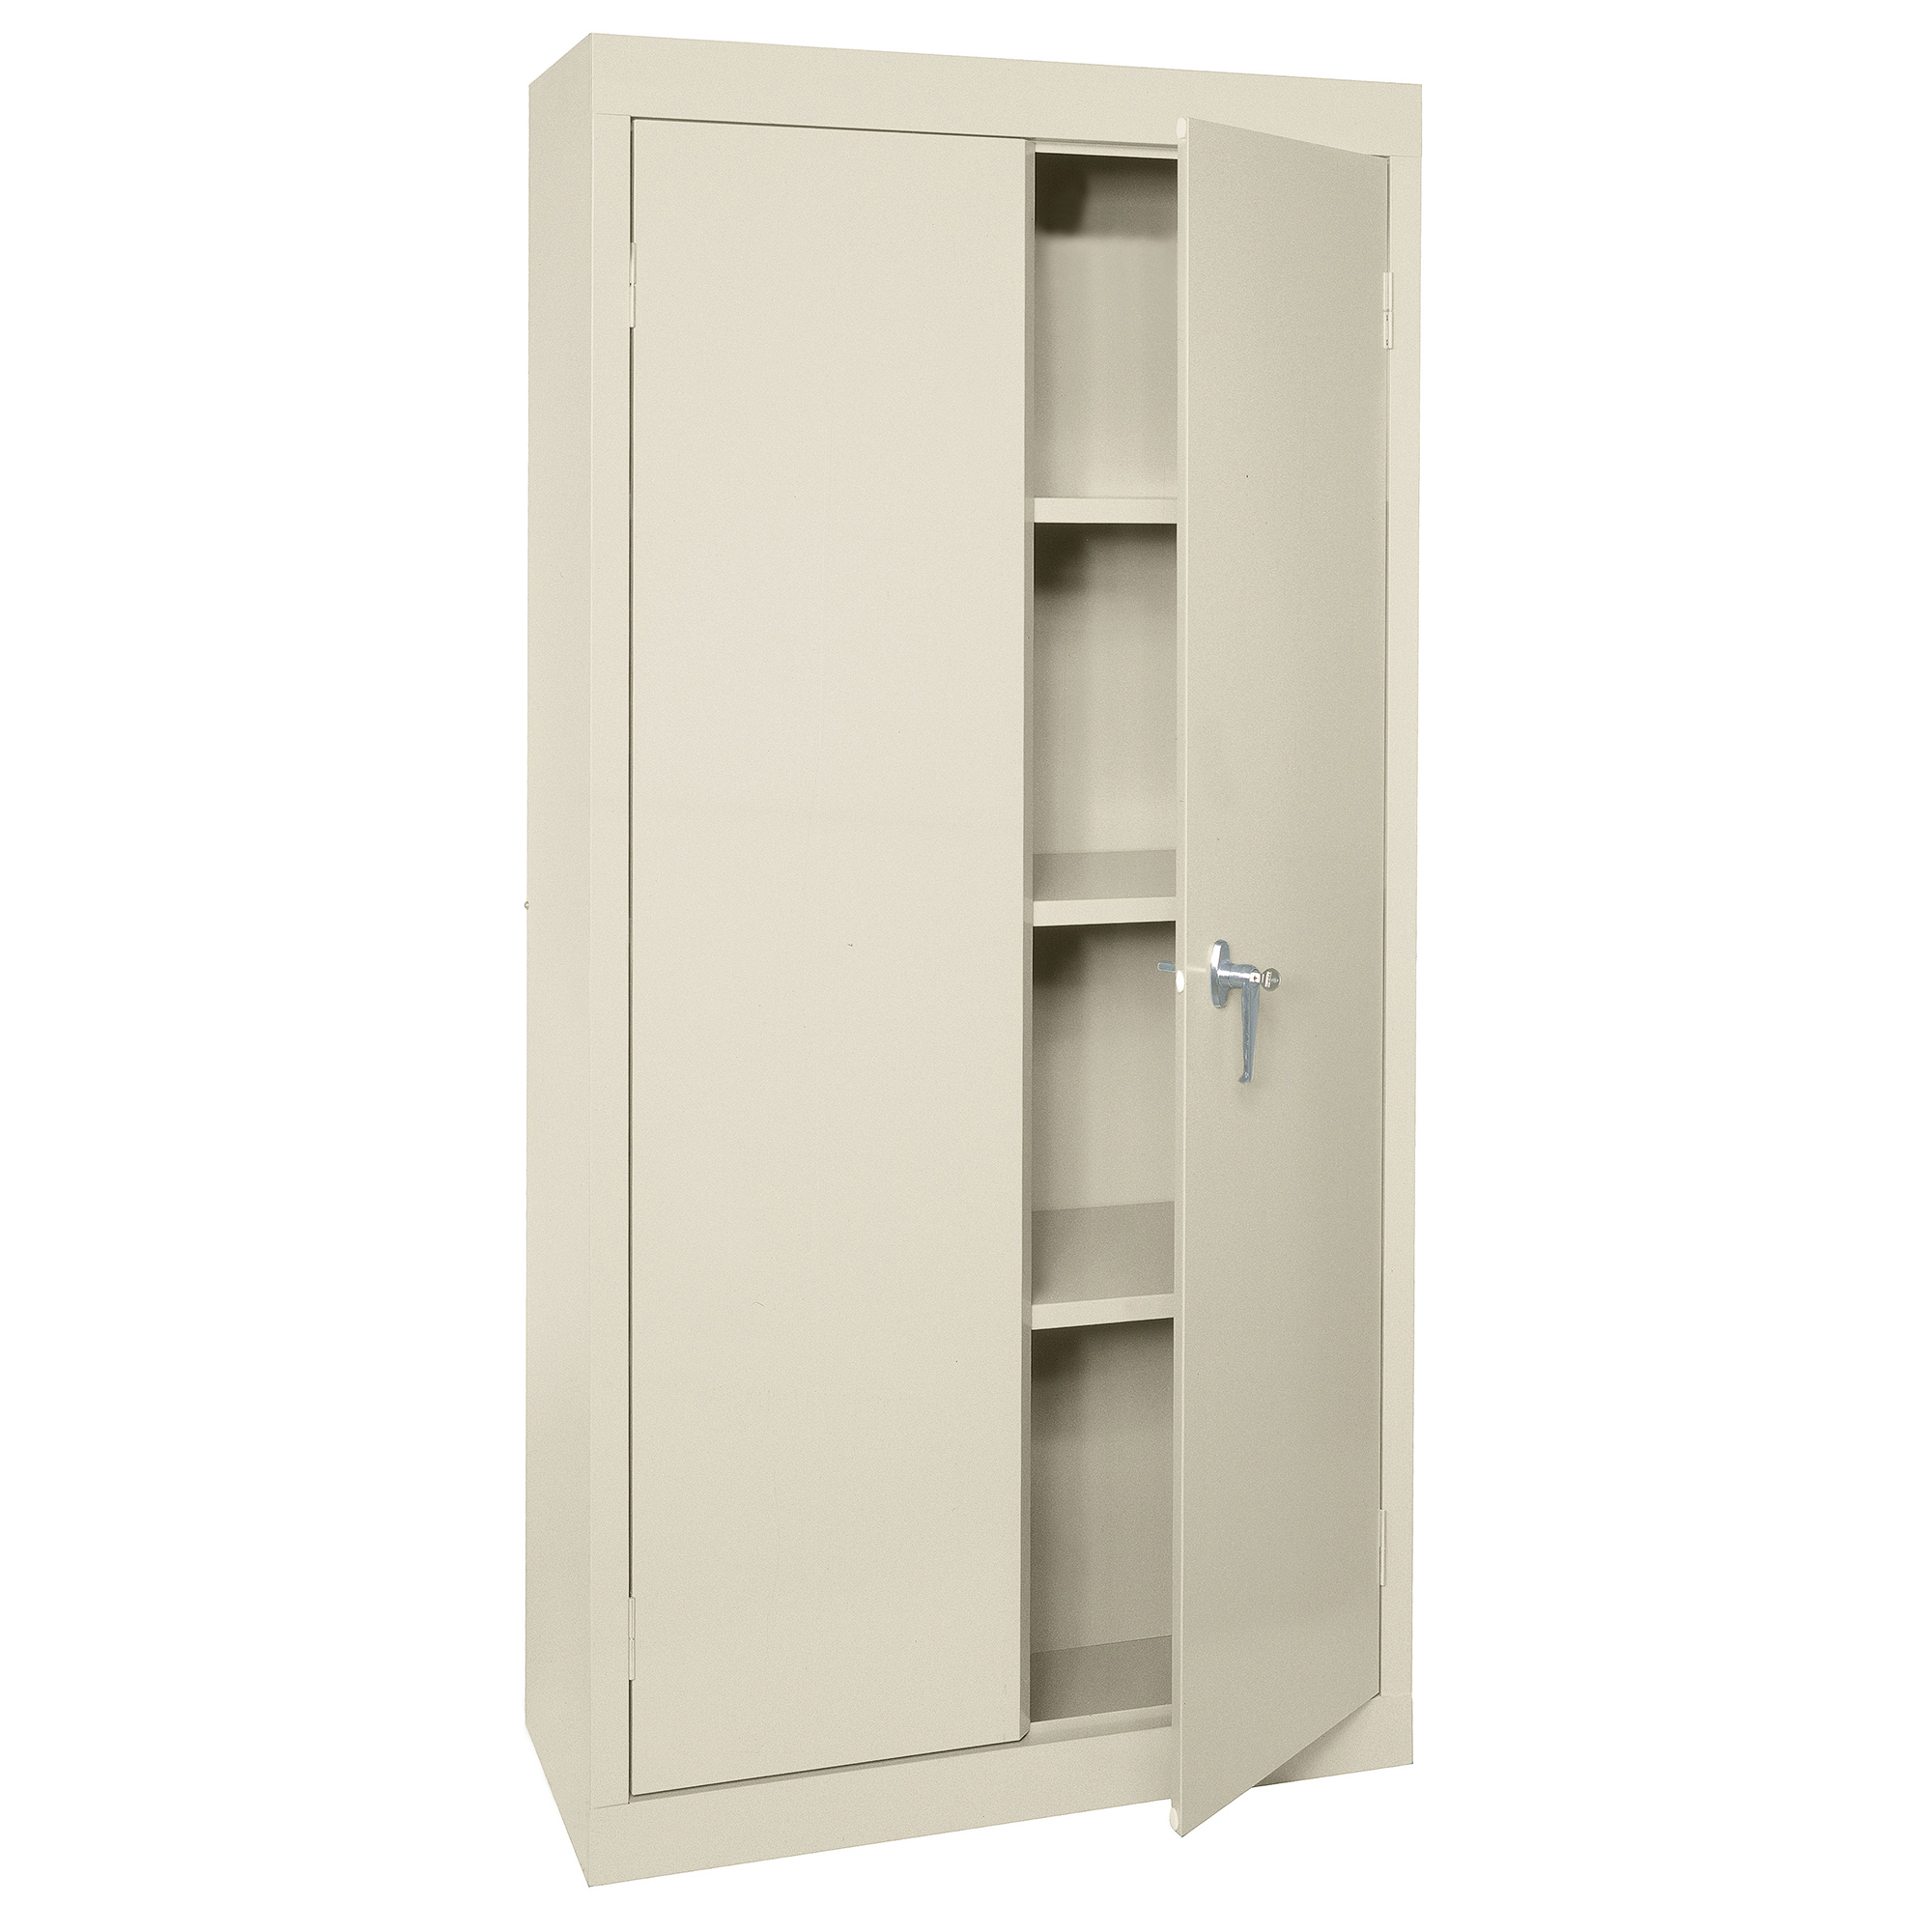 Sandusky, Value Line Cabinet 30x18x66 Putty, Height 66 in, Width 30 in, Color Putty, Model - Sandusky Lee VF31301866-07